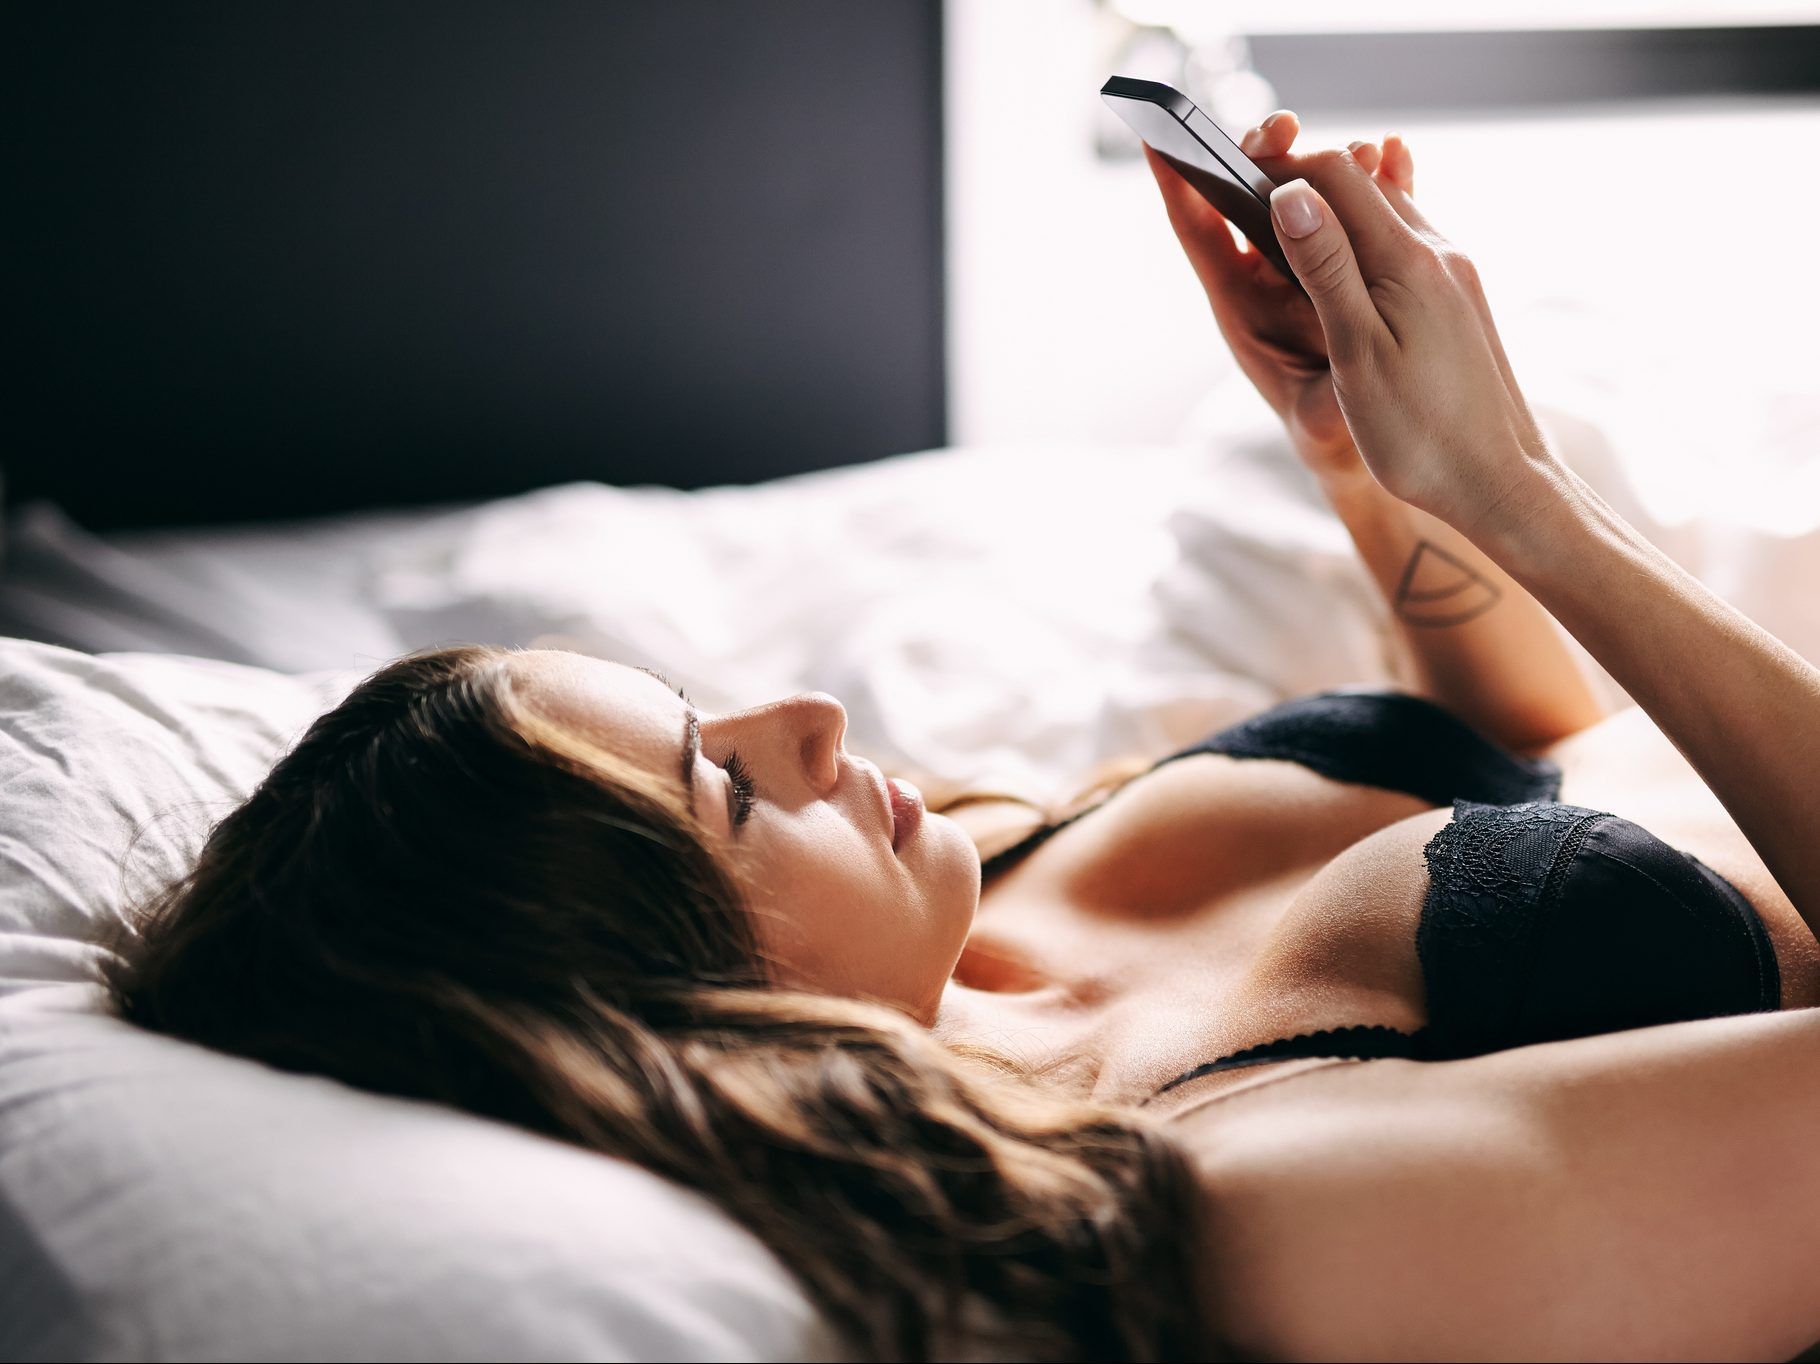 Women feel obligated to send sexy nude pics Study Toronto